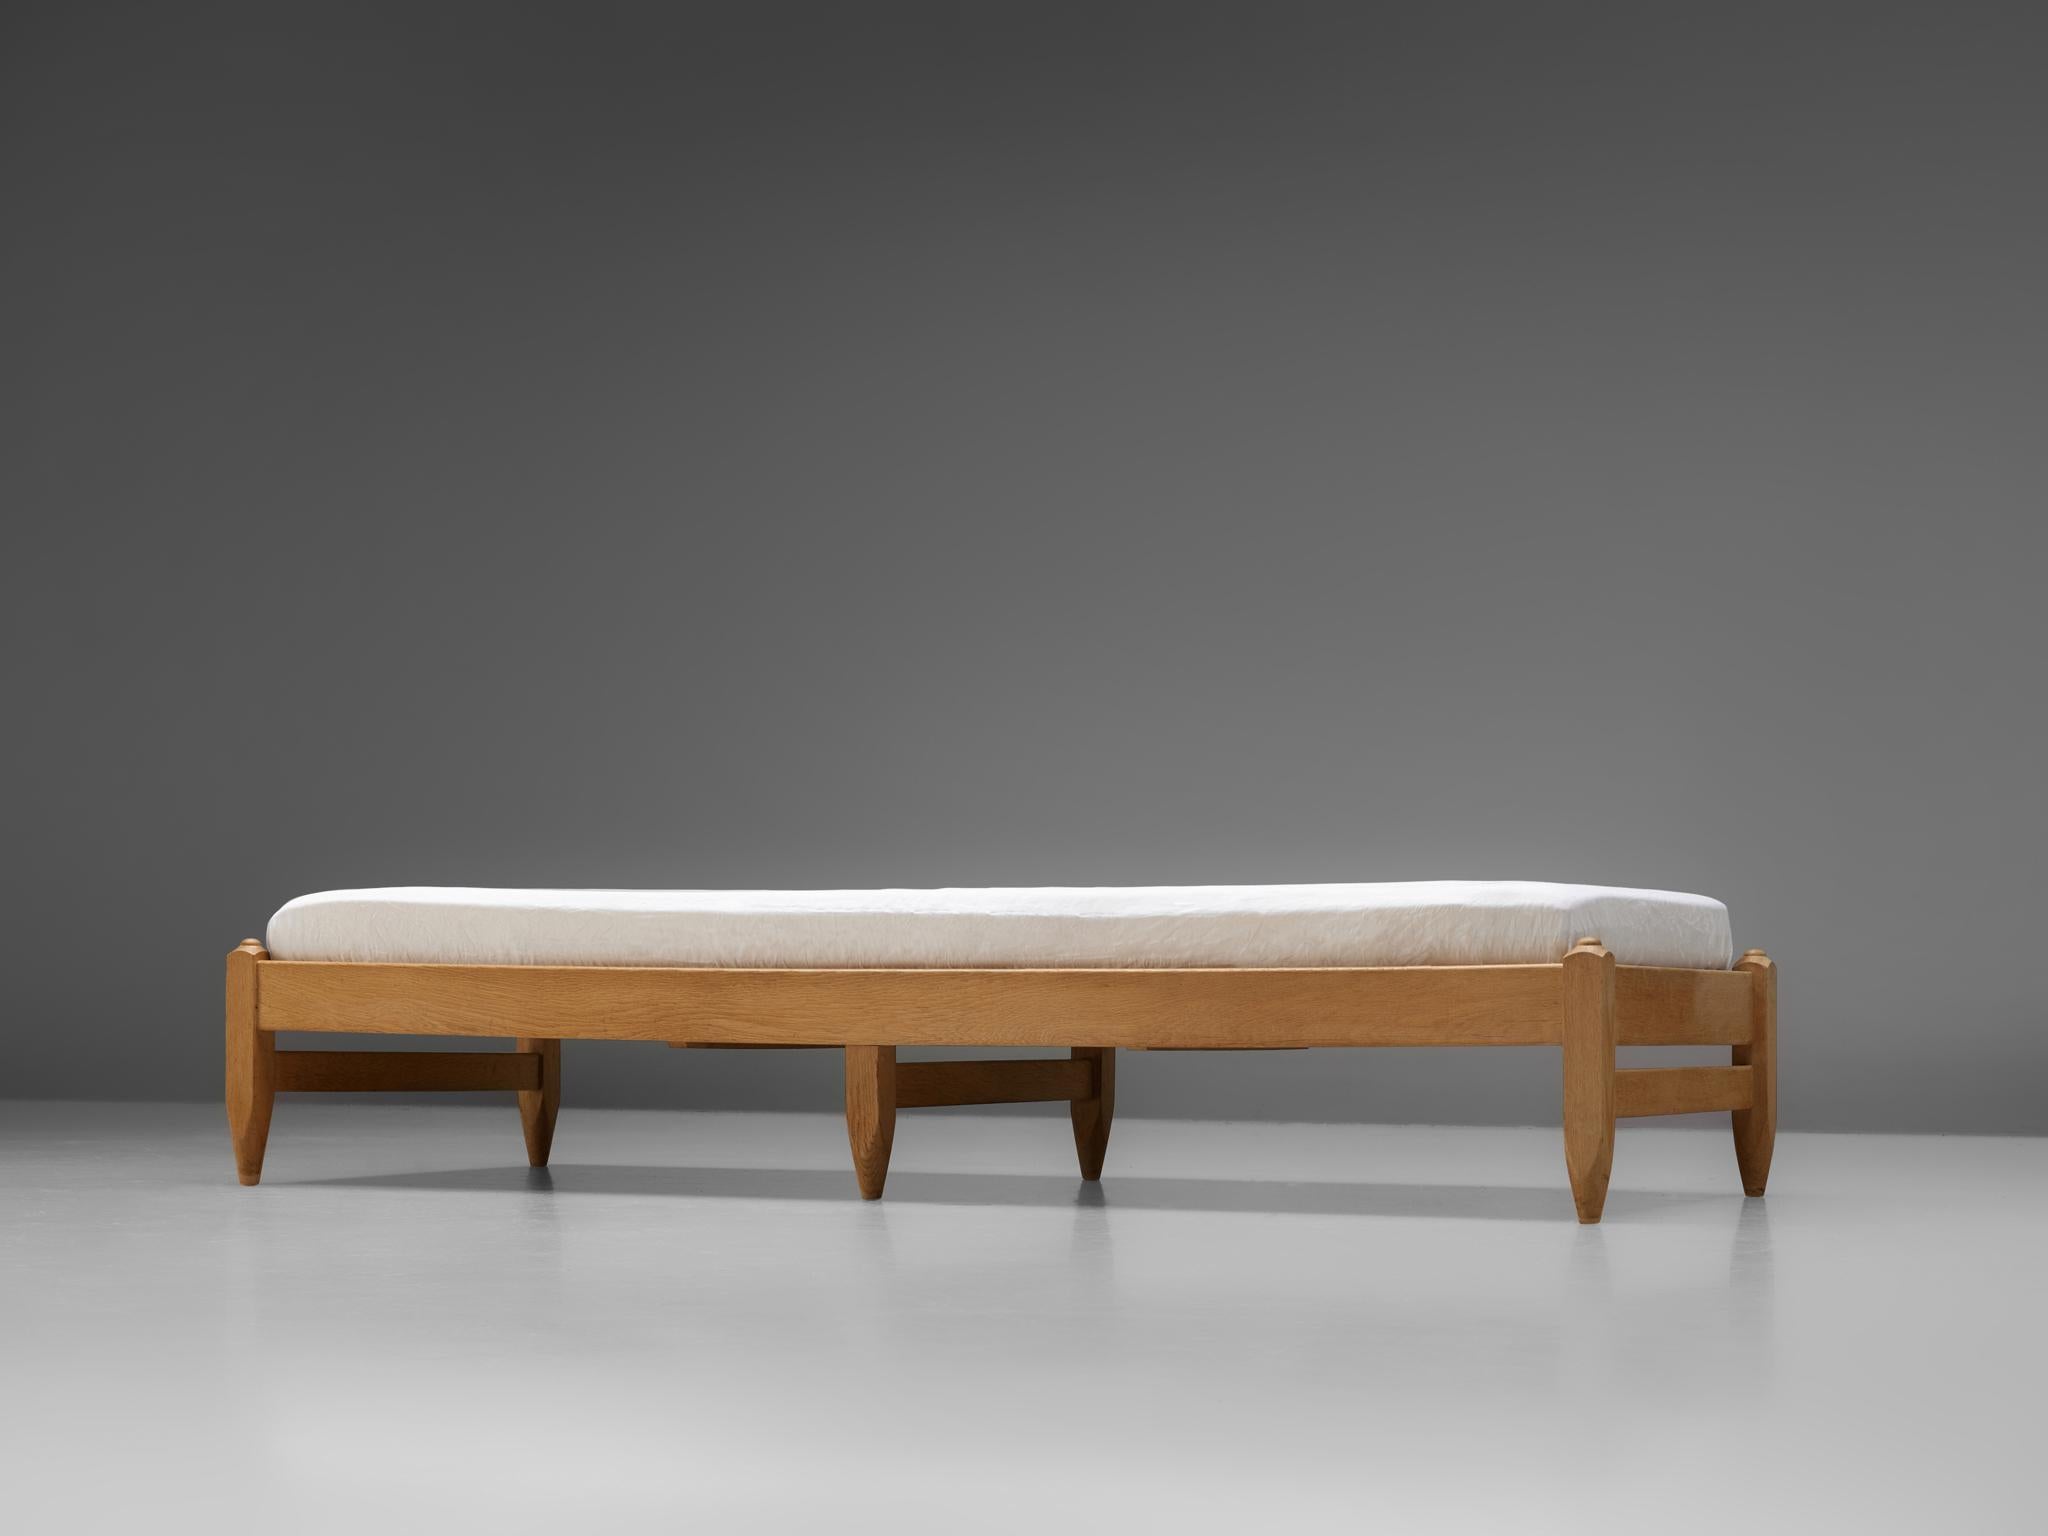 Guillerme et Chambron, daybed, oak, France, 1960s.

Sturdy daybed by Guillerme and Chambron, in solid oak with the typical characteristic details like the sculpted forms of the legs. They lift the bed at the ends as well as in the middle of the bed.